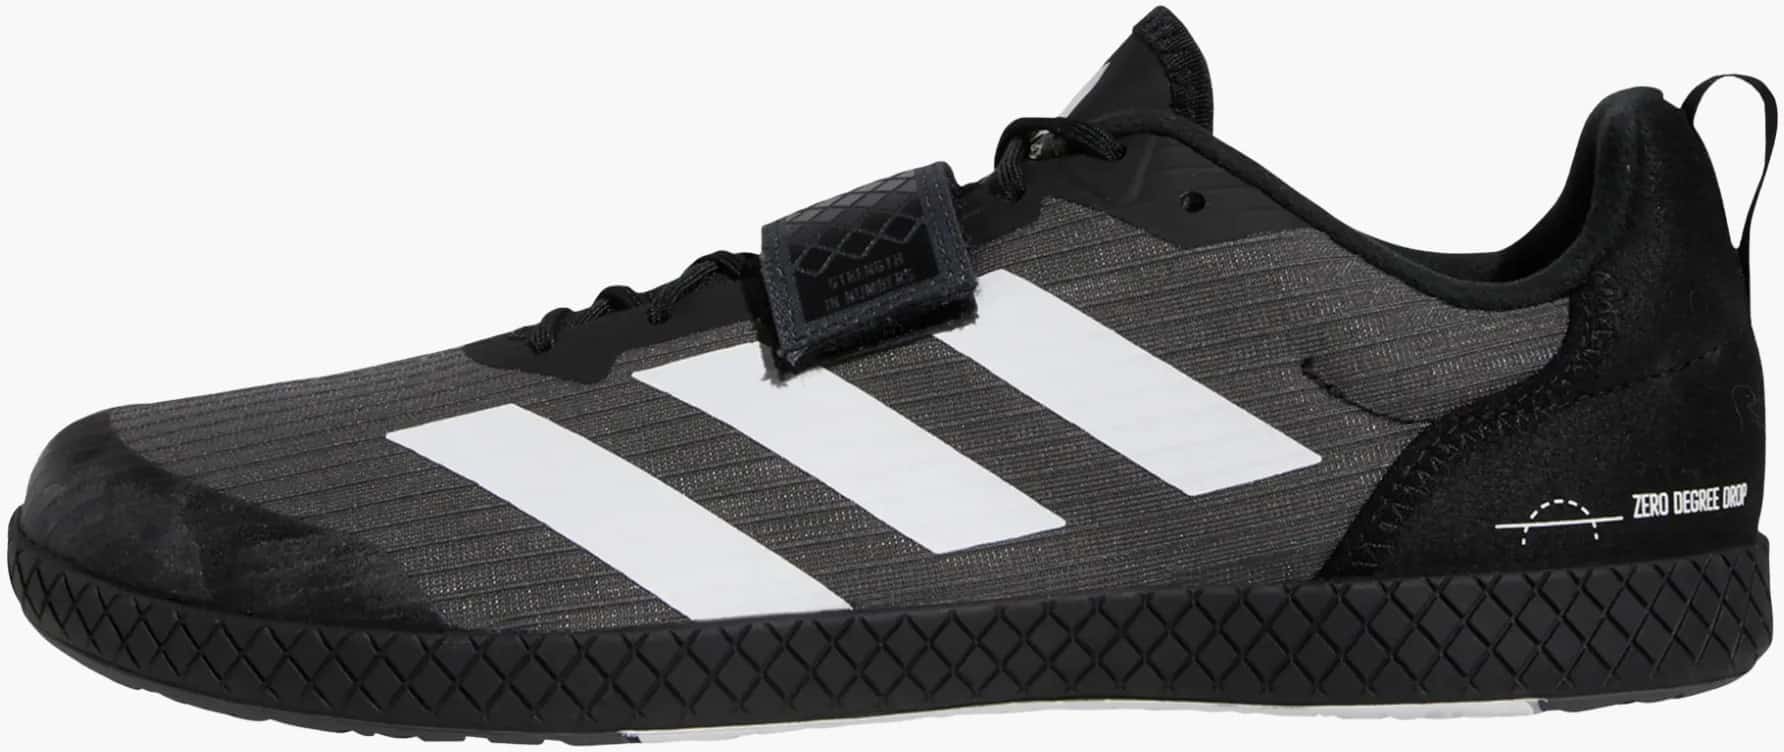 Adidas The Total Deadlift Shoes left side